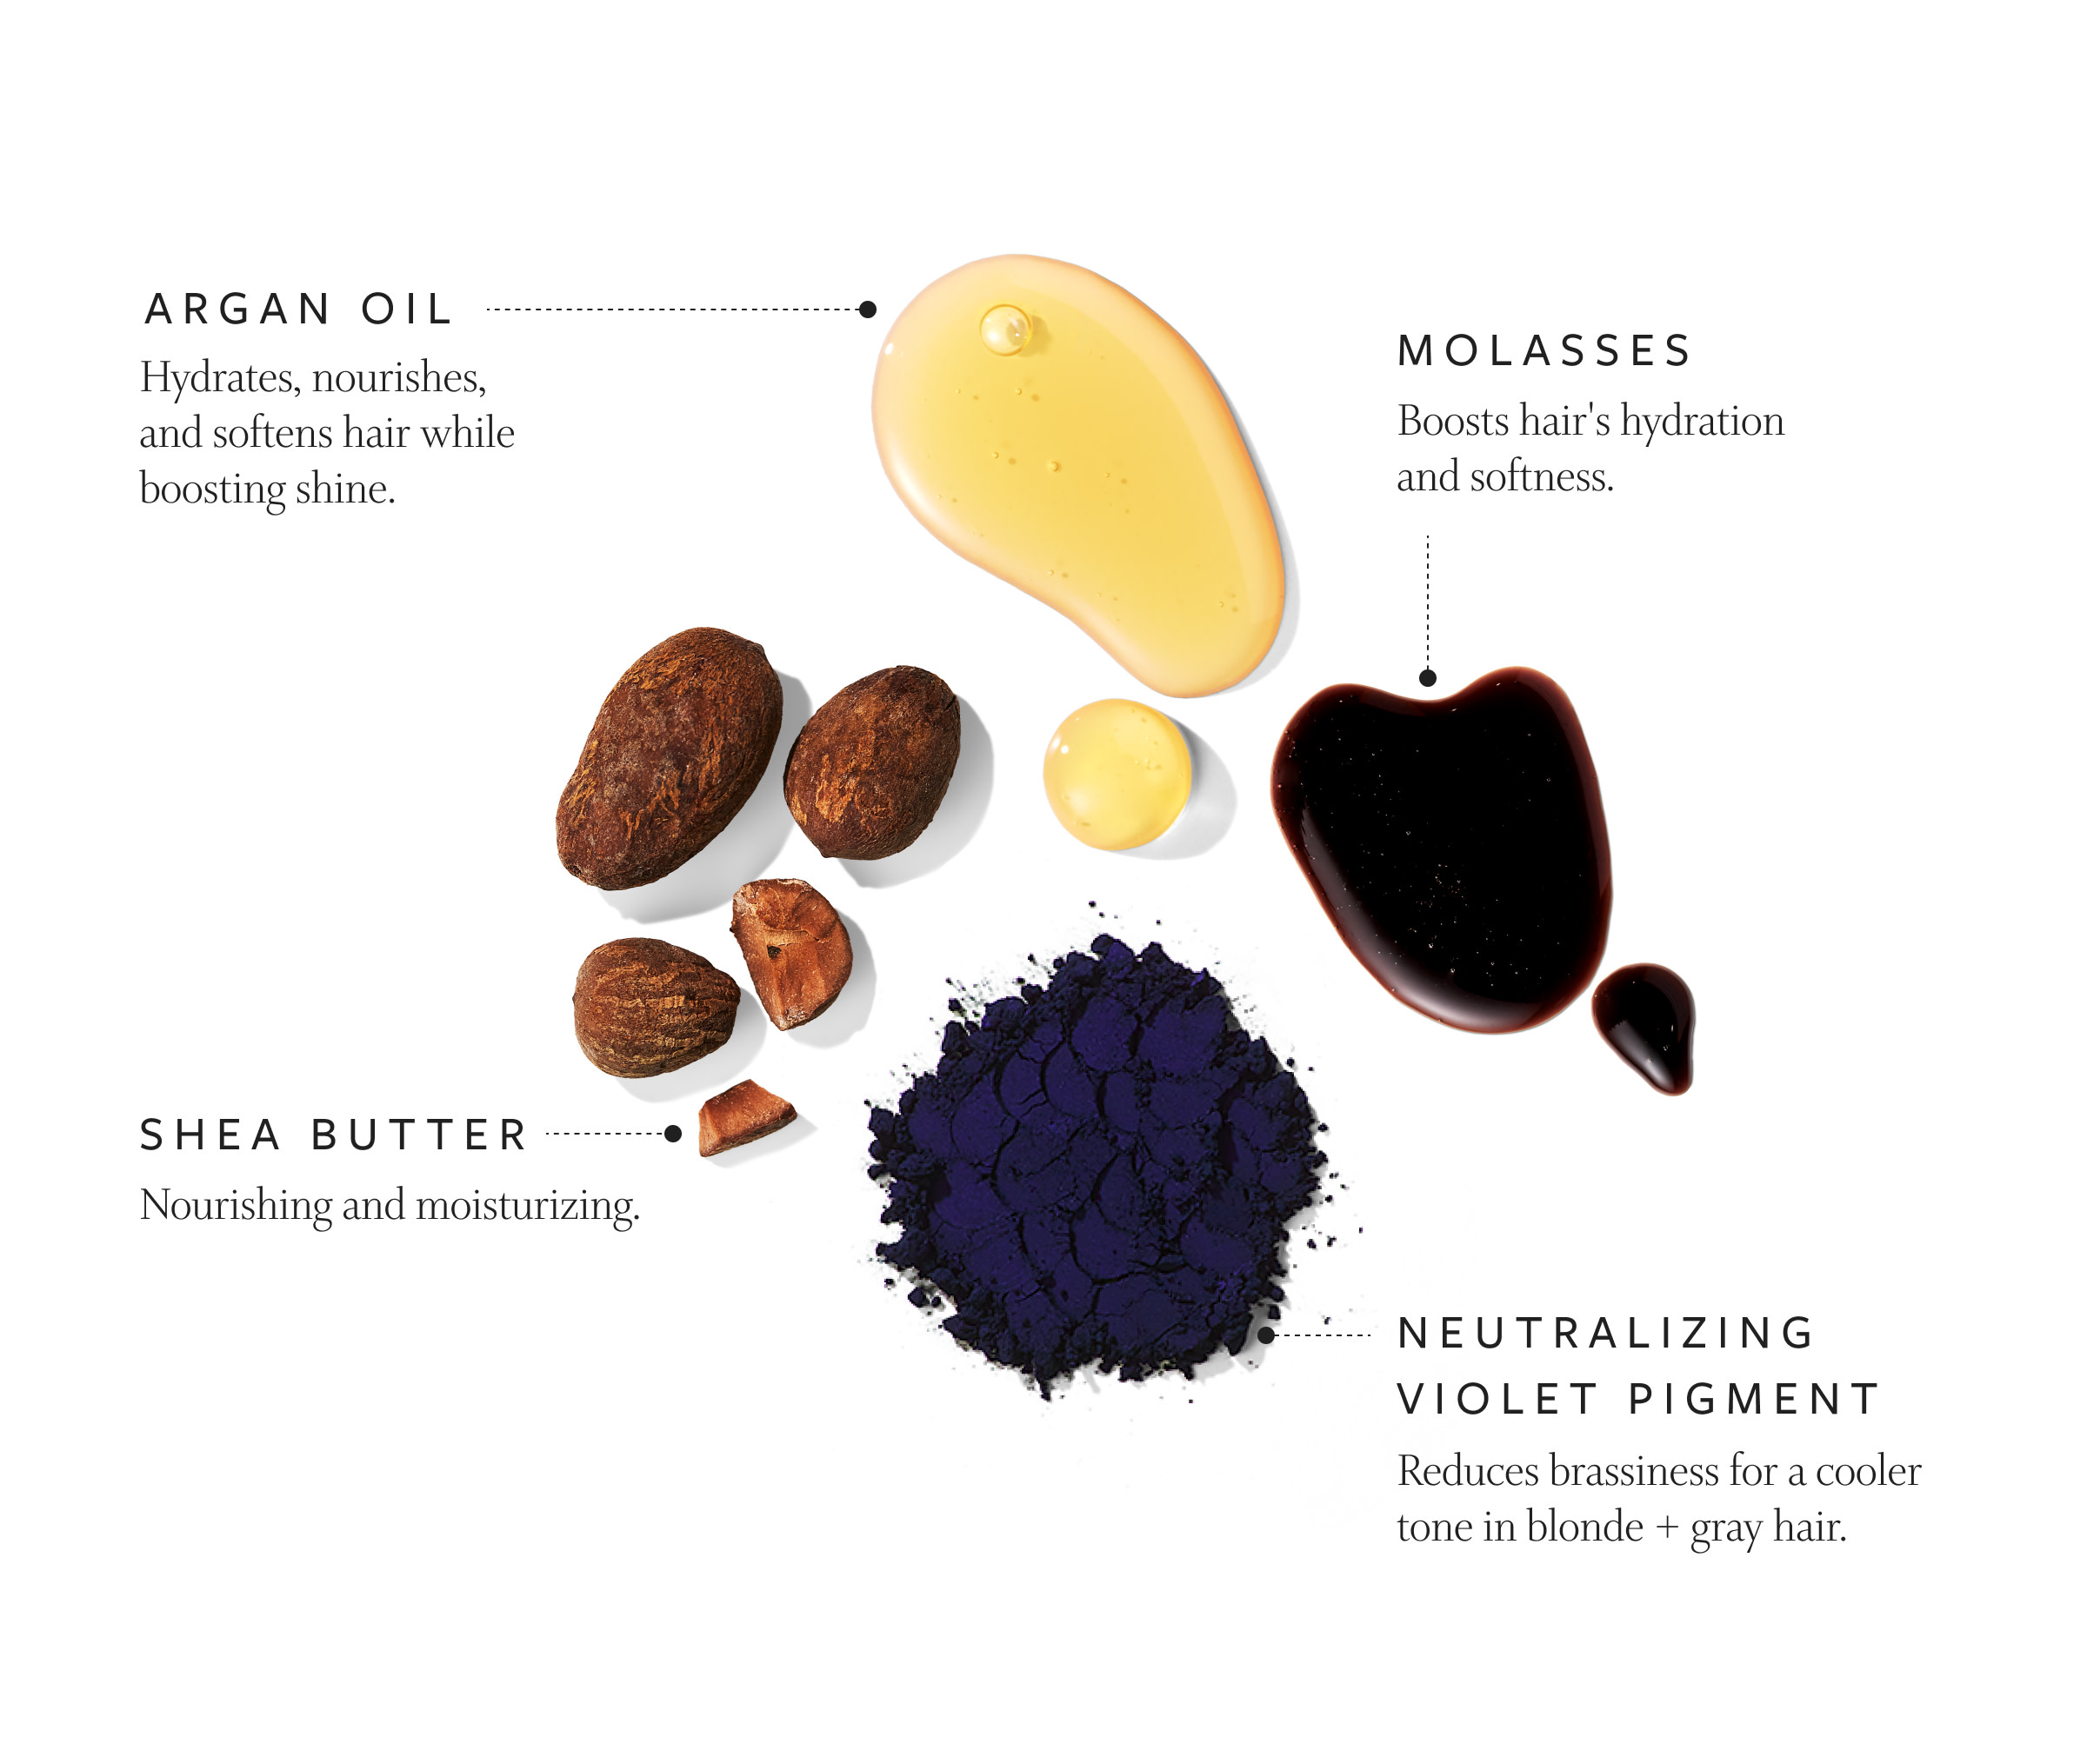 Images of raw ingredients. Argan Oil hydrates, nourishes and softens hair while boosting shine. Molasses boosts hair's hydration and softness. Shea Butter nourishing and moisturizing. Neutralizing violet pigment reduces brassiness for a cooler tone in Blonde + gray hair. 